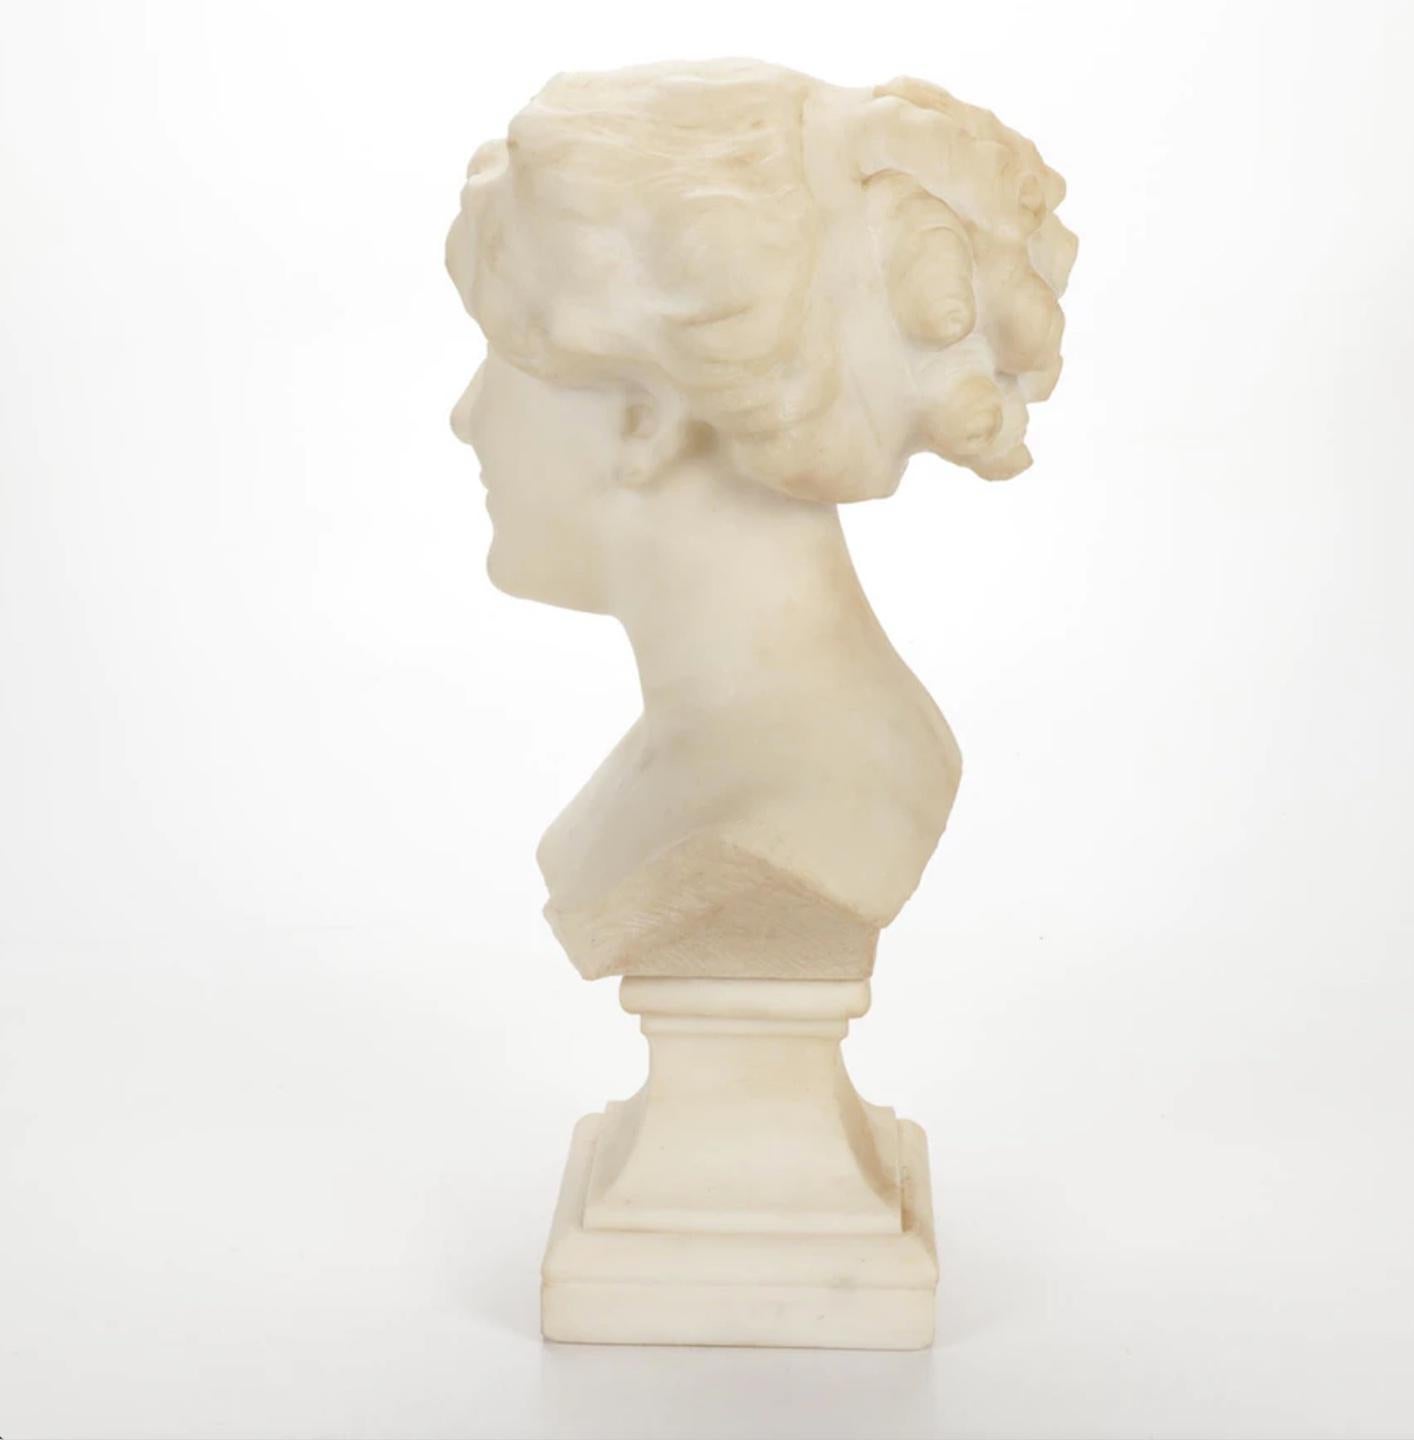 Hand-Carved Antique Art Deco Carved Marble Bust of Woman by Paul Philippe on Pedestal